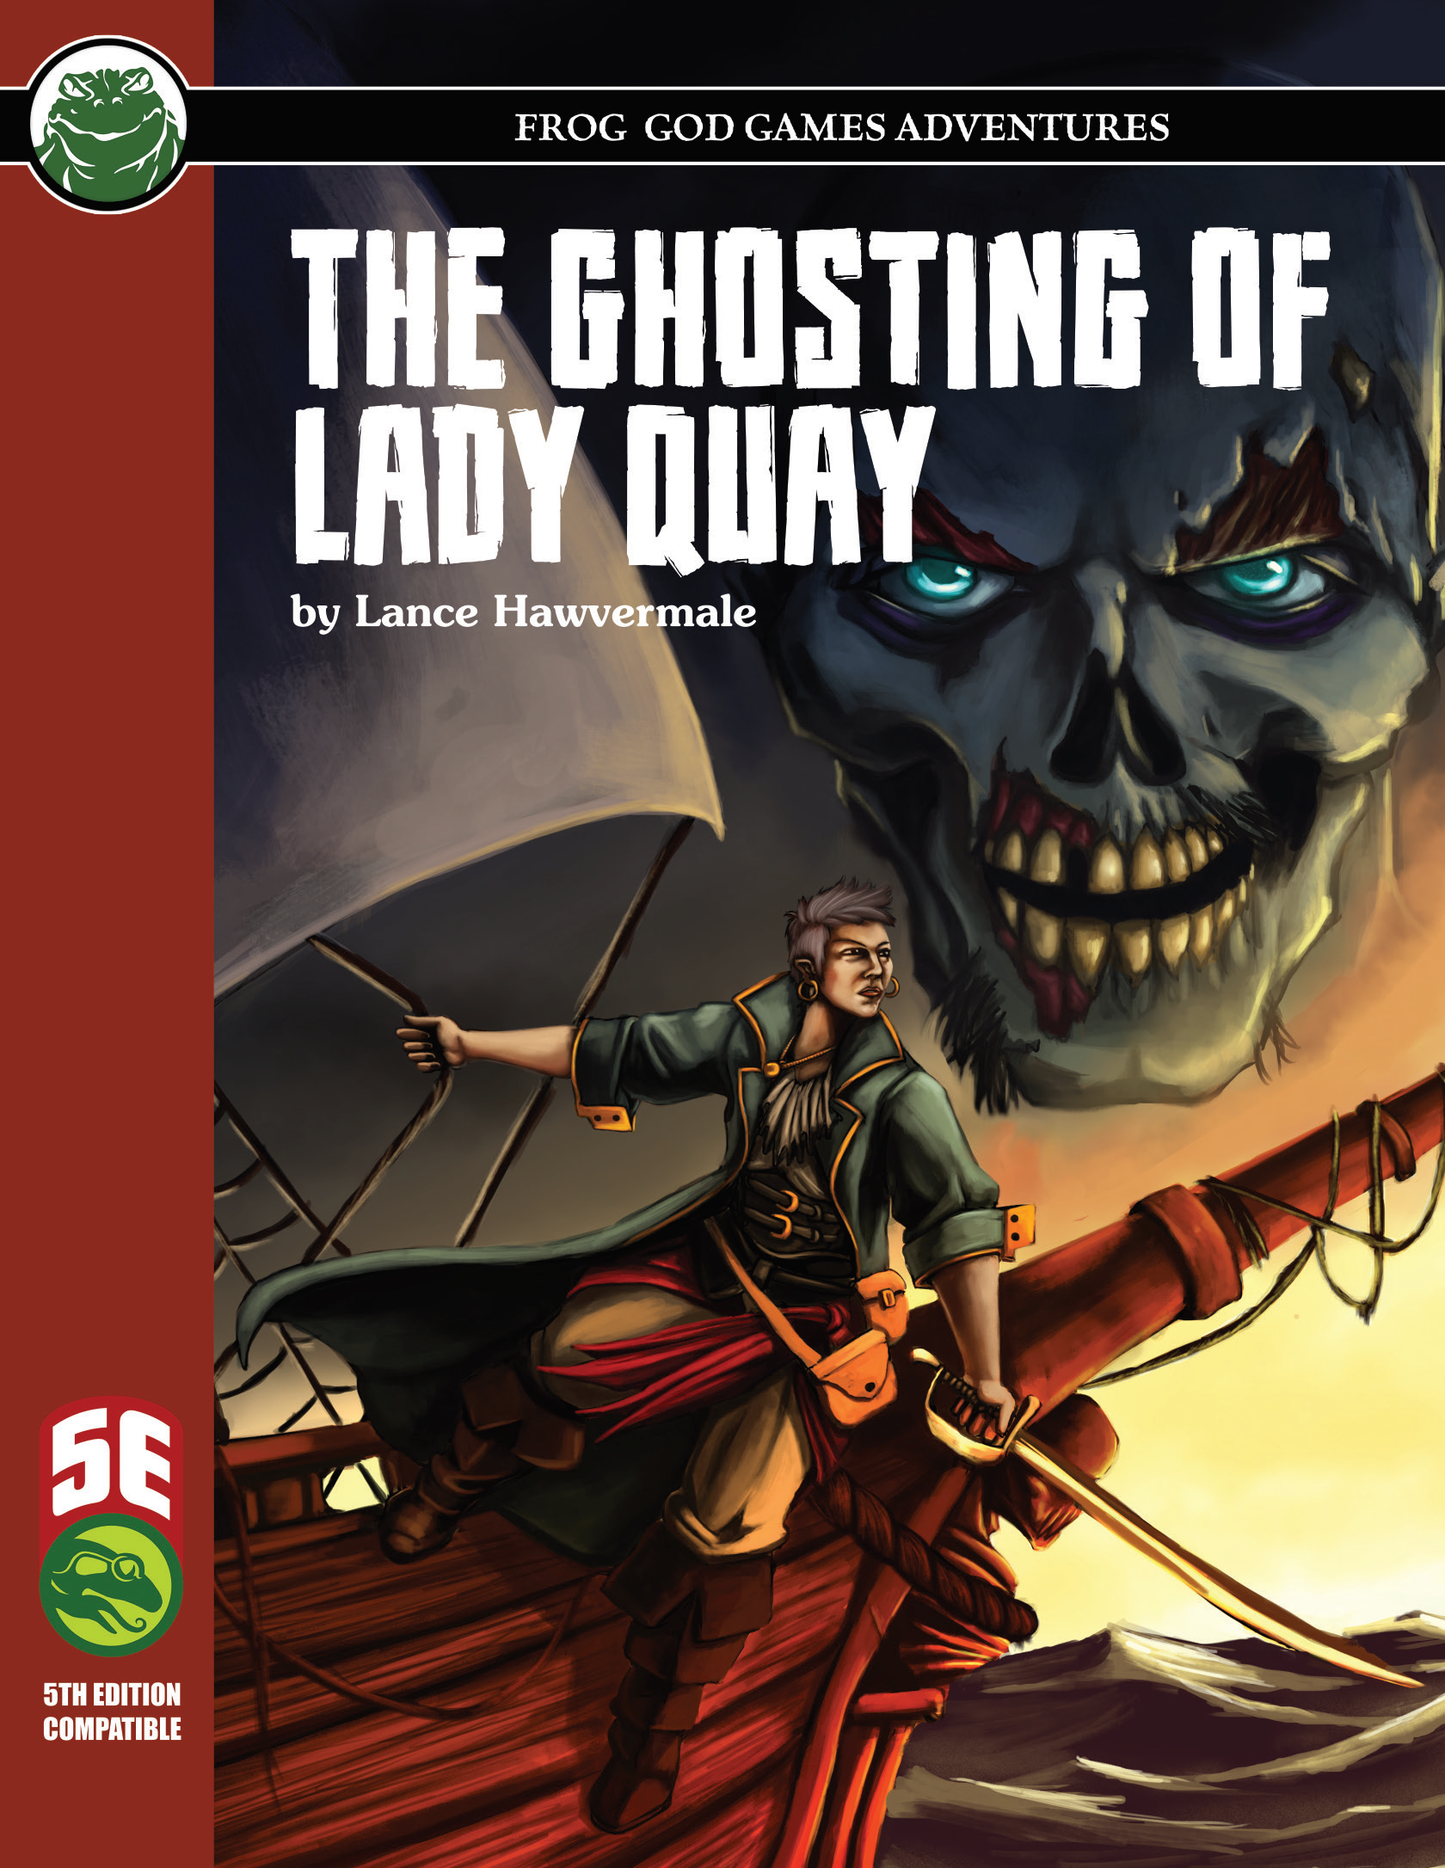 The Ghosting of Lady Quay